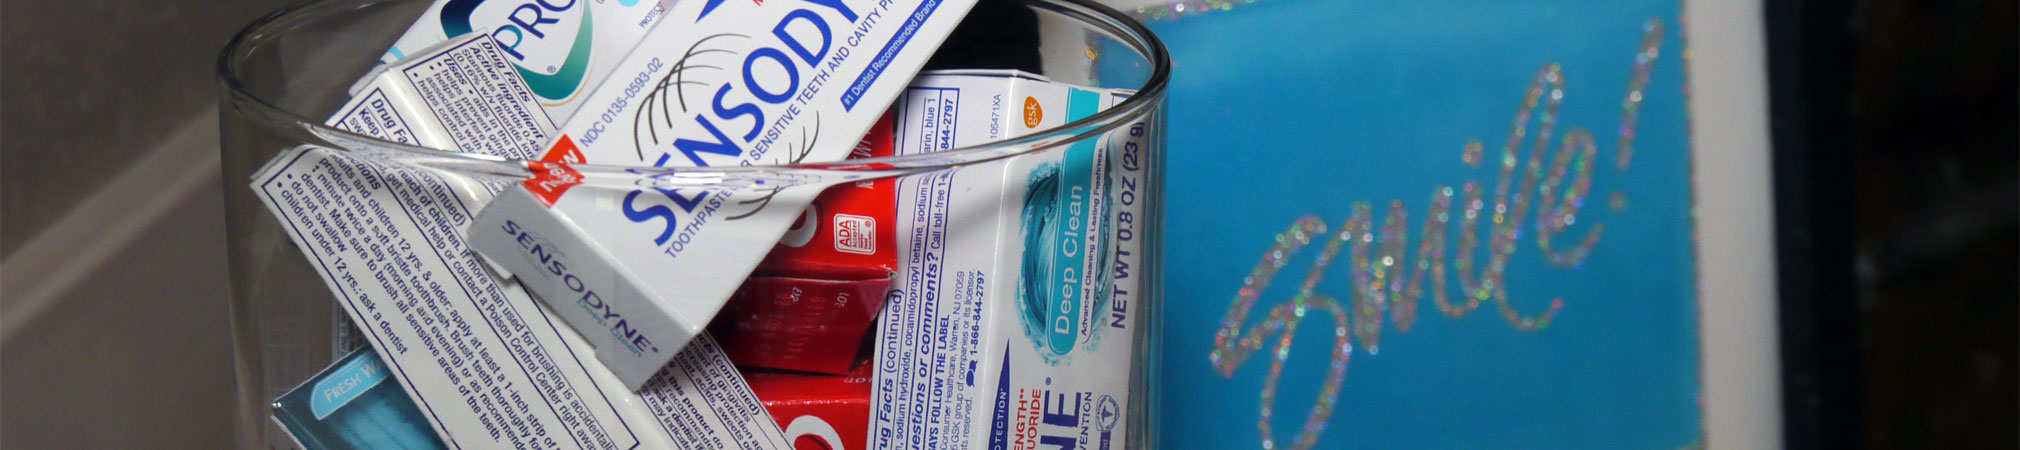 A collection of different brands of toothpastes